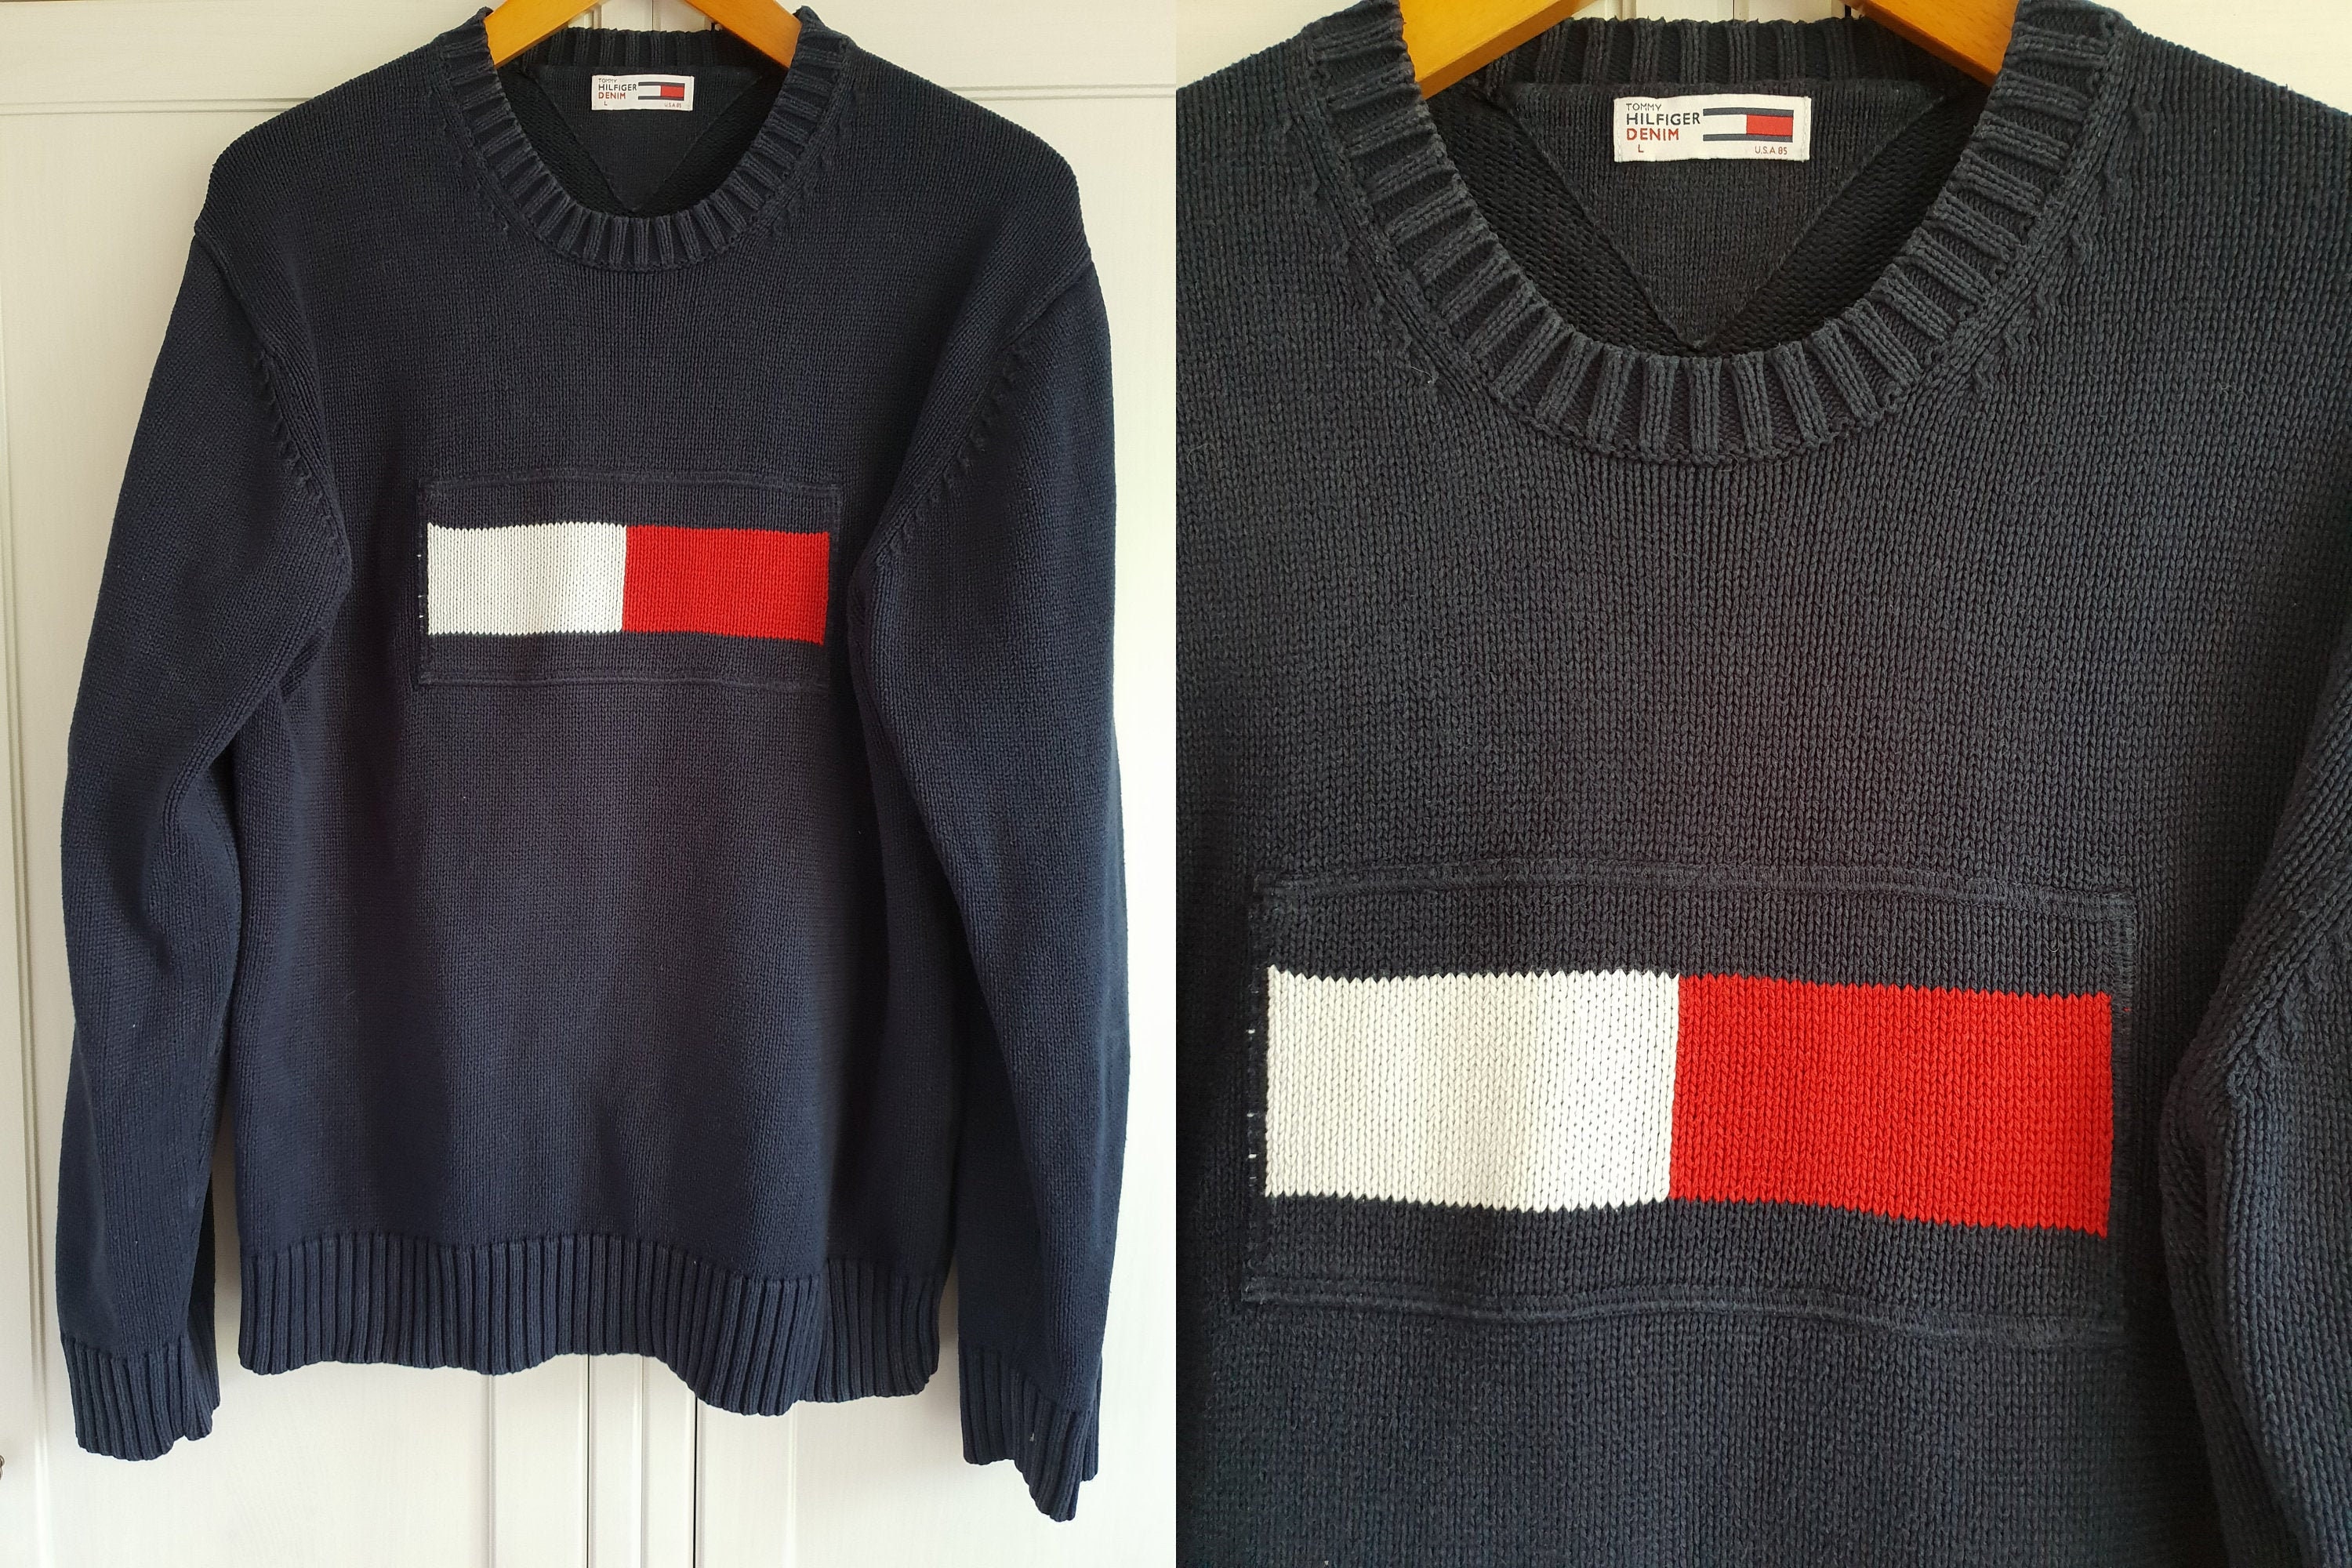 Buy Vintage Tommy Hilfiger Sweater Navy Blue Red White Oldschool in India Etsy